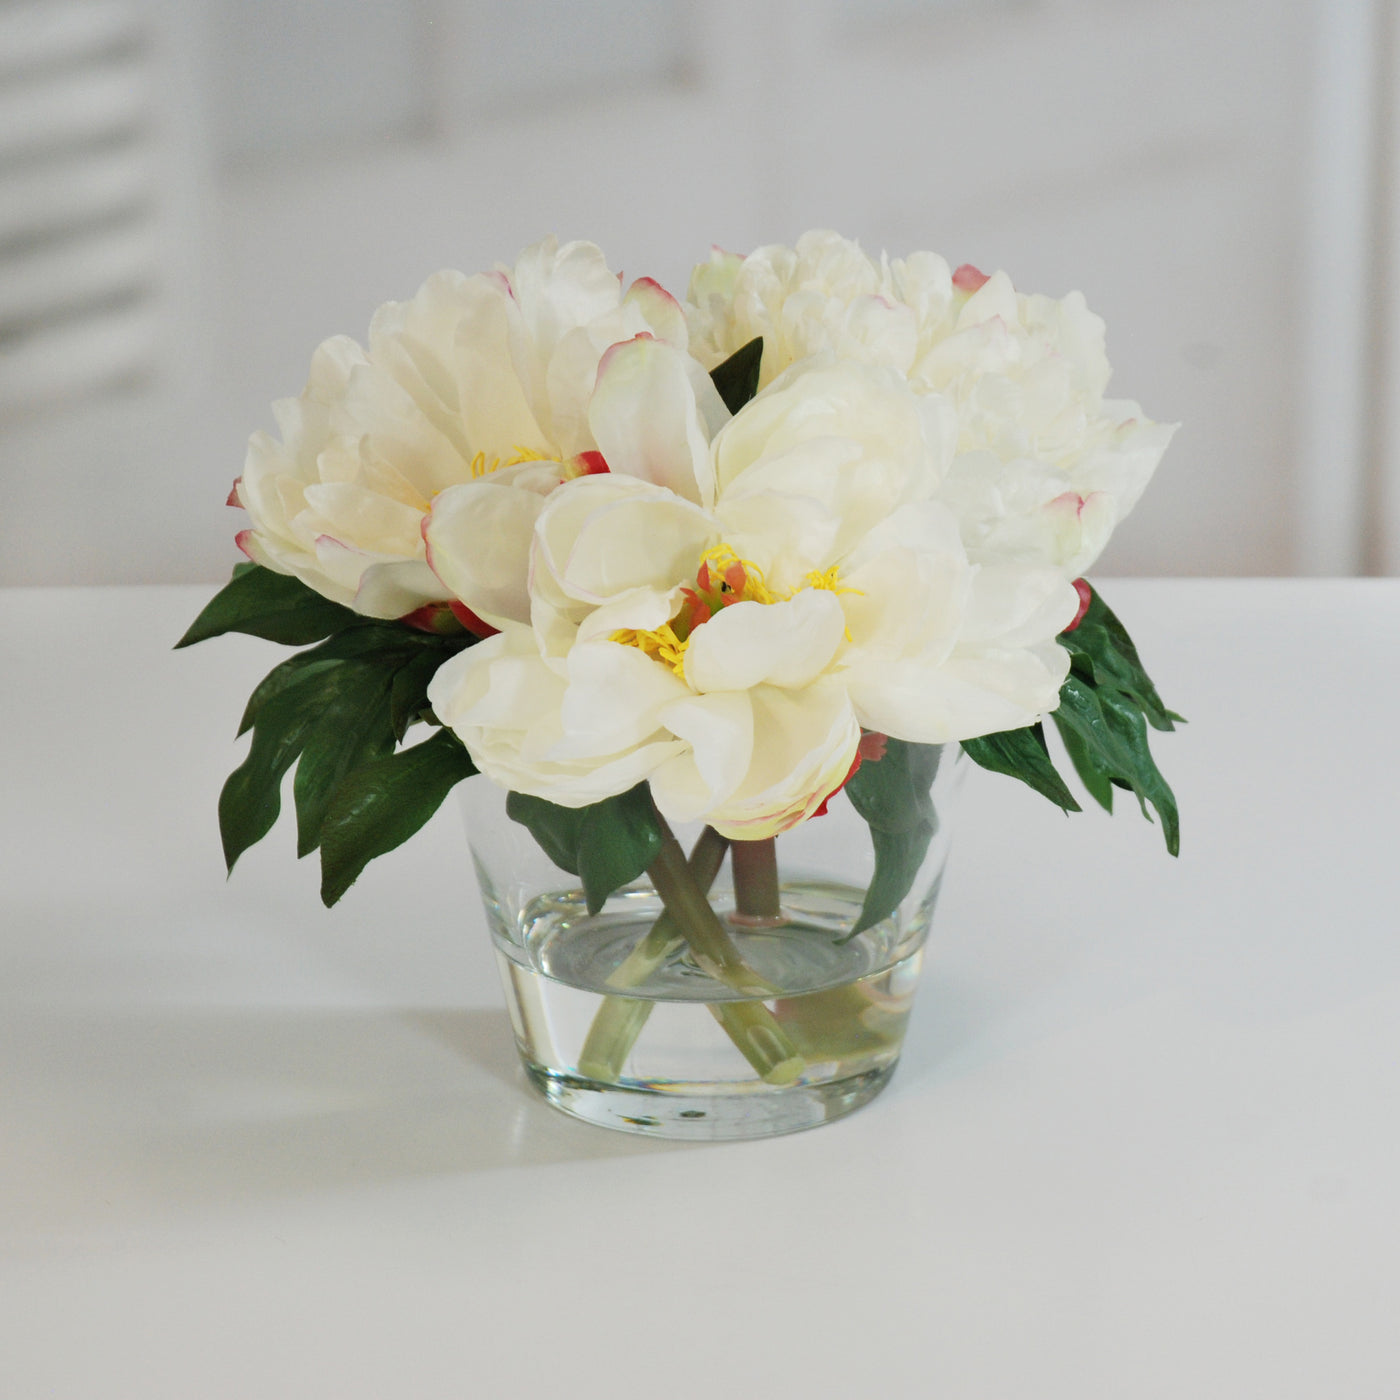 PEONIES IN GLASS 10'' (WHI015-WH) - Winward Home faux floral arrangements